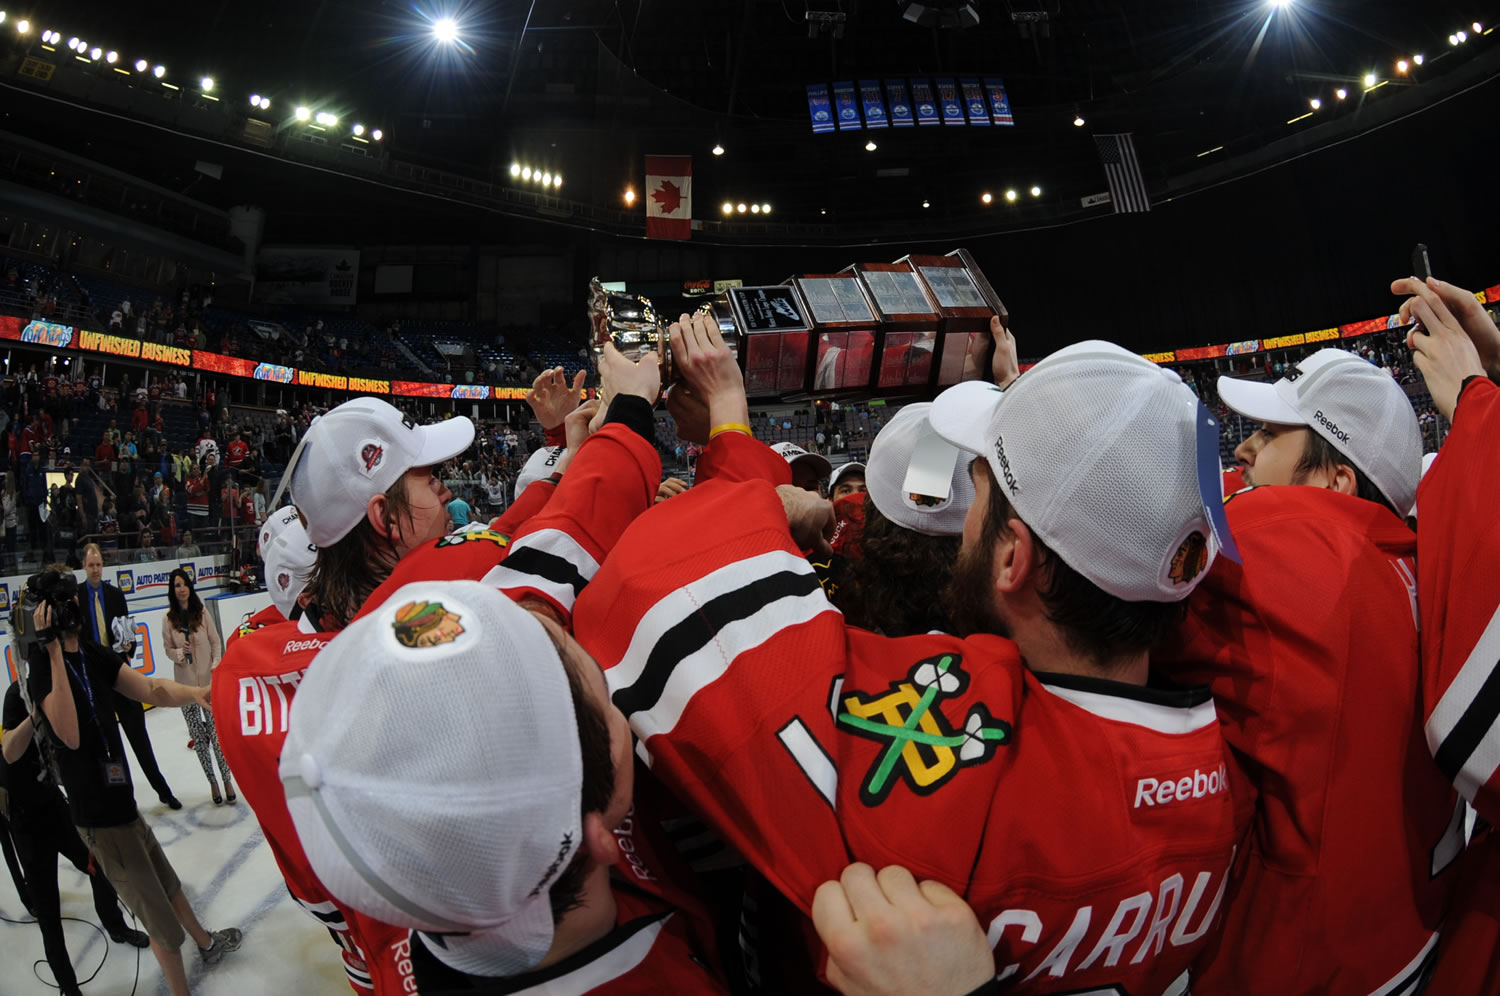 The Portland Winterhawks hoist the Ed Chynoweth Trophy as champions of the Western Hockey League after defeating the Edmonton Oil Kings 5-1 in Game 6 on Sunday in Edmonton.